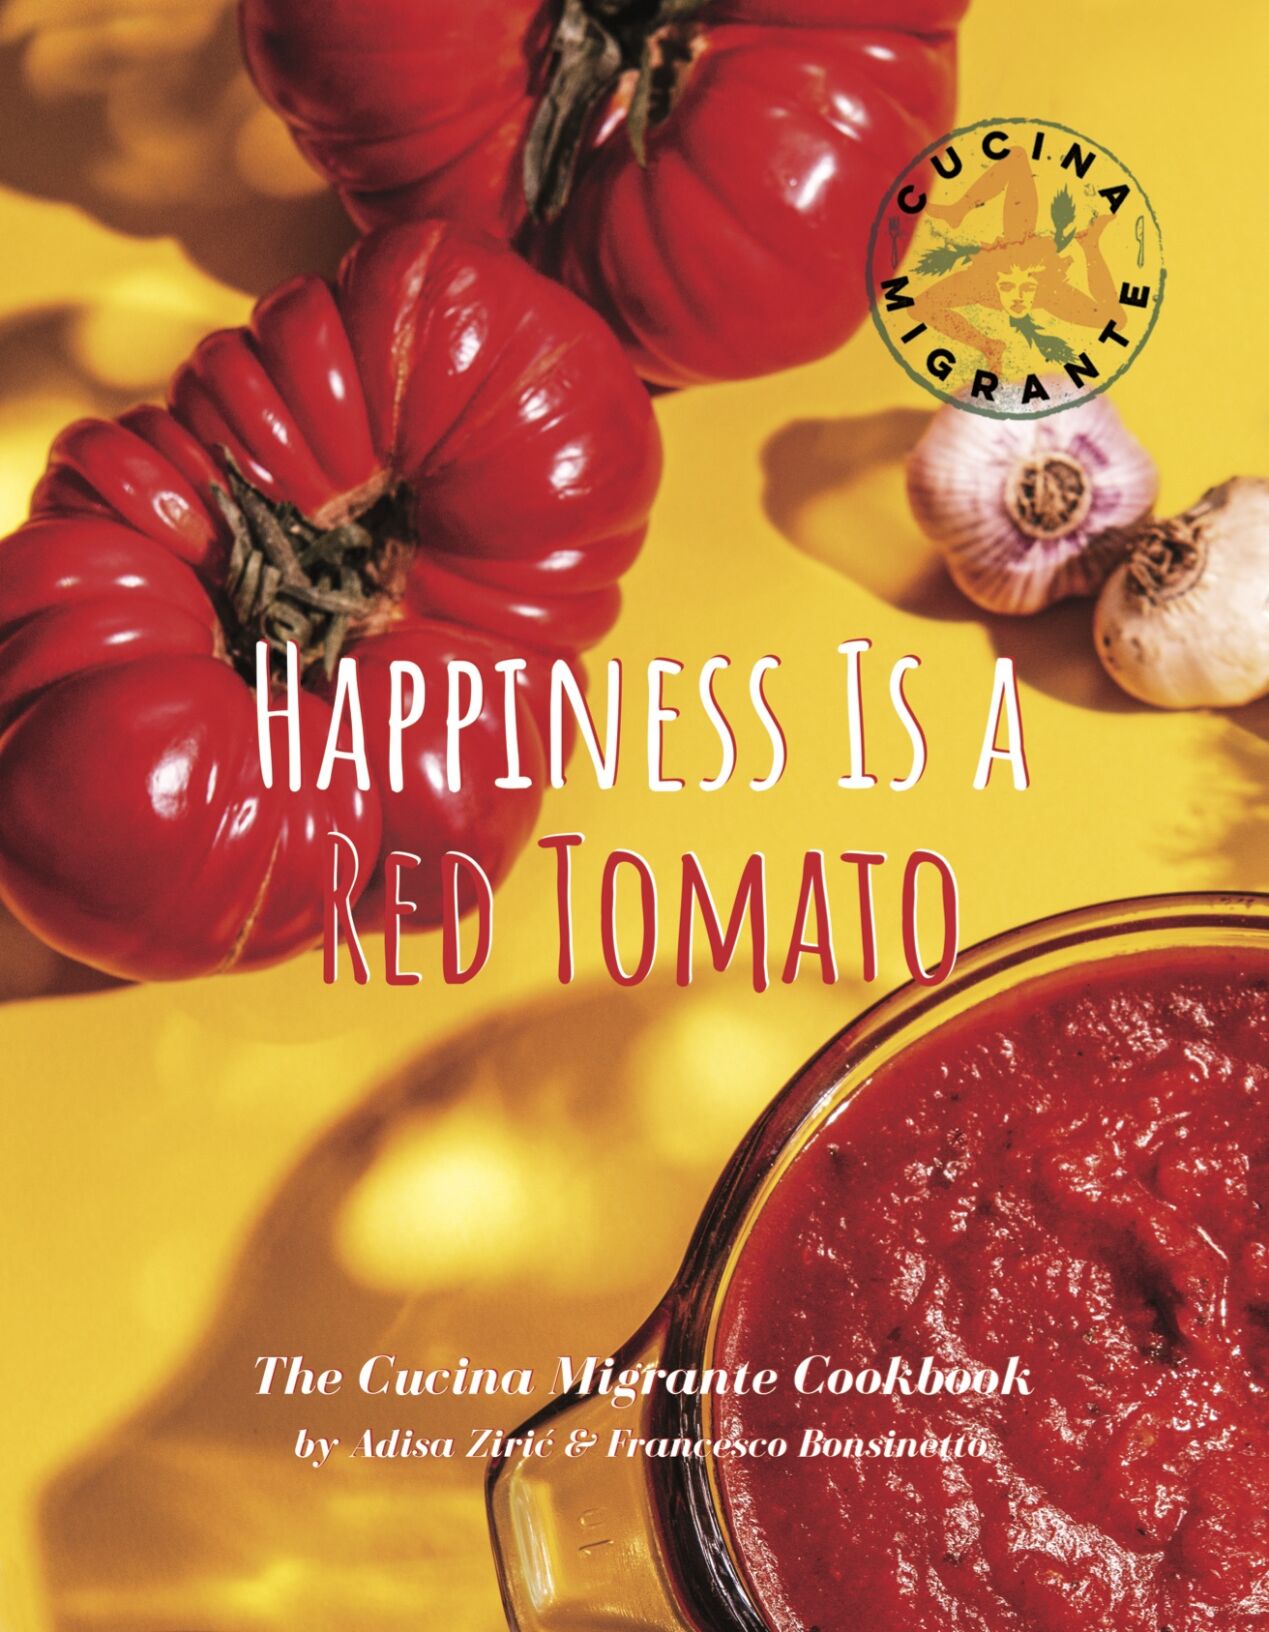 fresh off the press, happiness is a red tomato